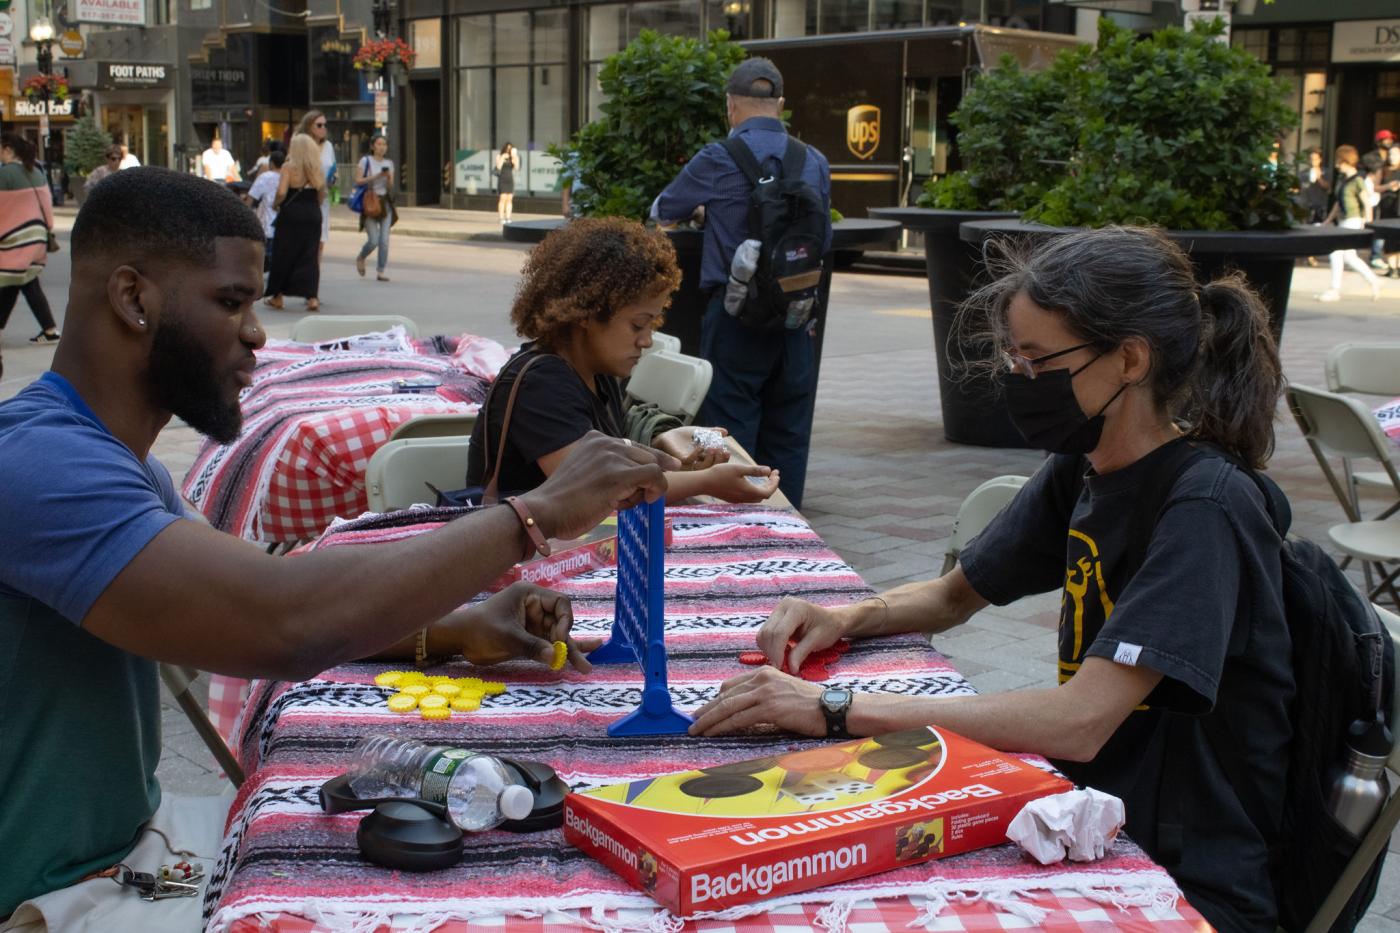 At a table, a white woman, in a face mask, and a Black man, in a blue t-shirt, play a game.